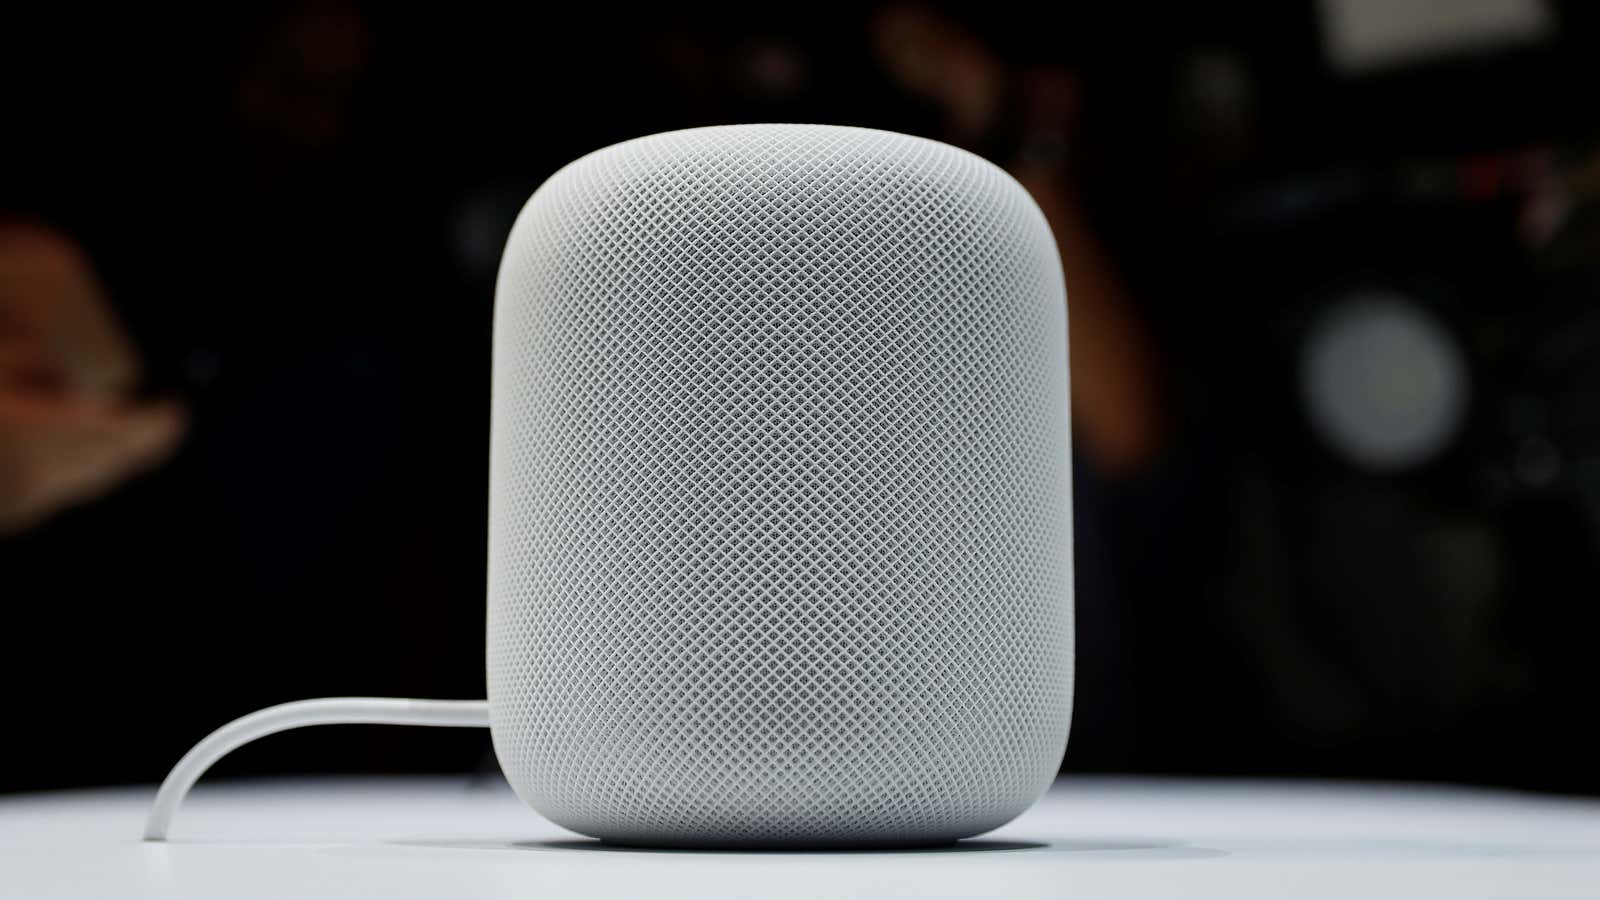 A prototype Apple HomePod is seen during the annual Apple Worldwide Developer Conference (WWDC) in San Jose, California, U.S. June 5, 2017. REUTERS/Stephen Lam –…